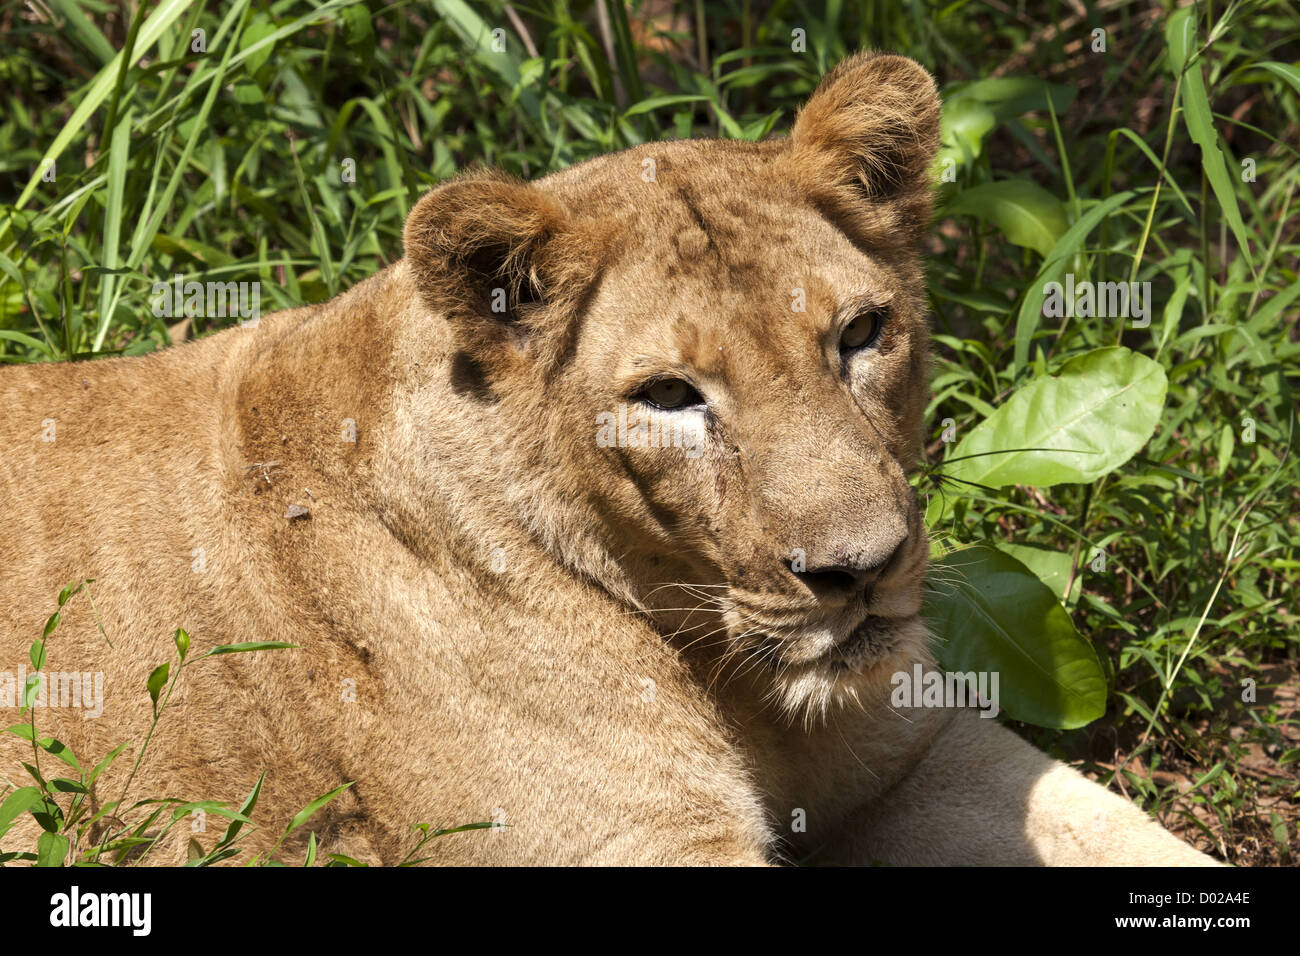 Lions In India Stock Photo